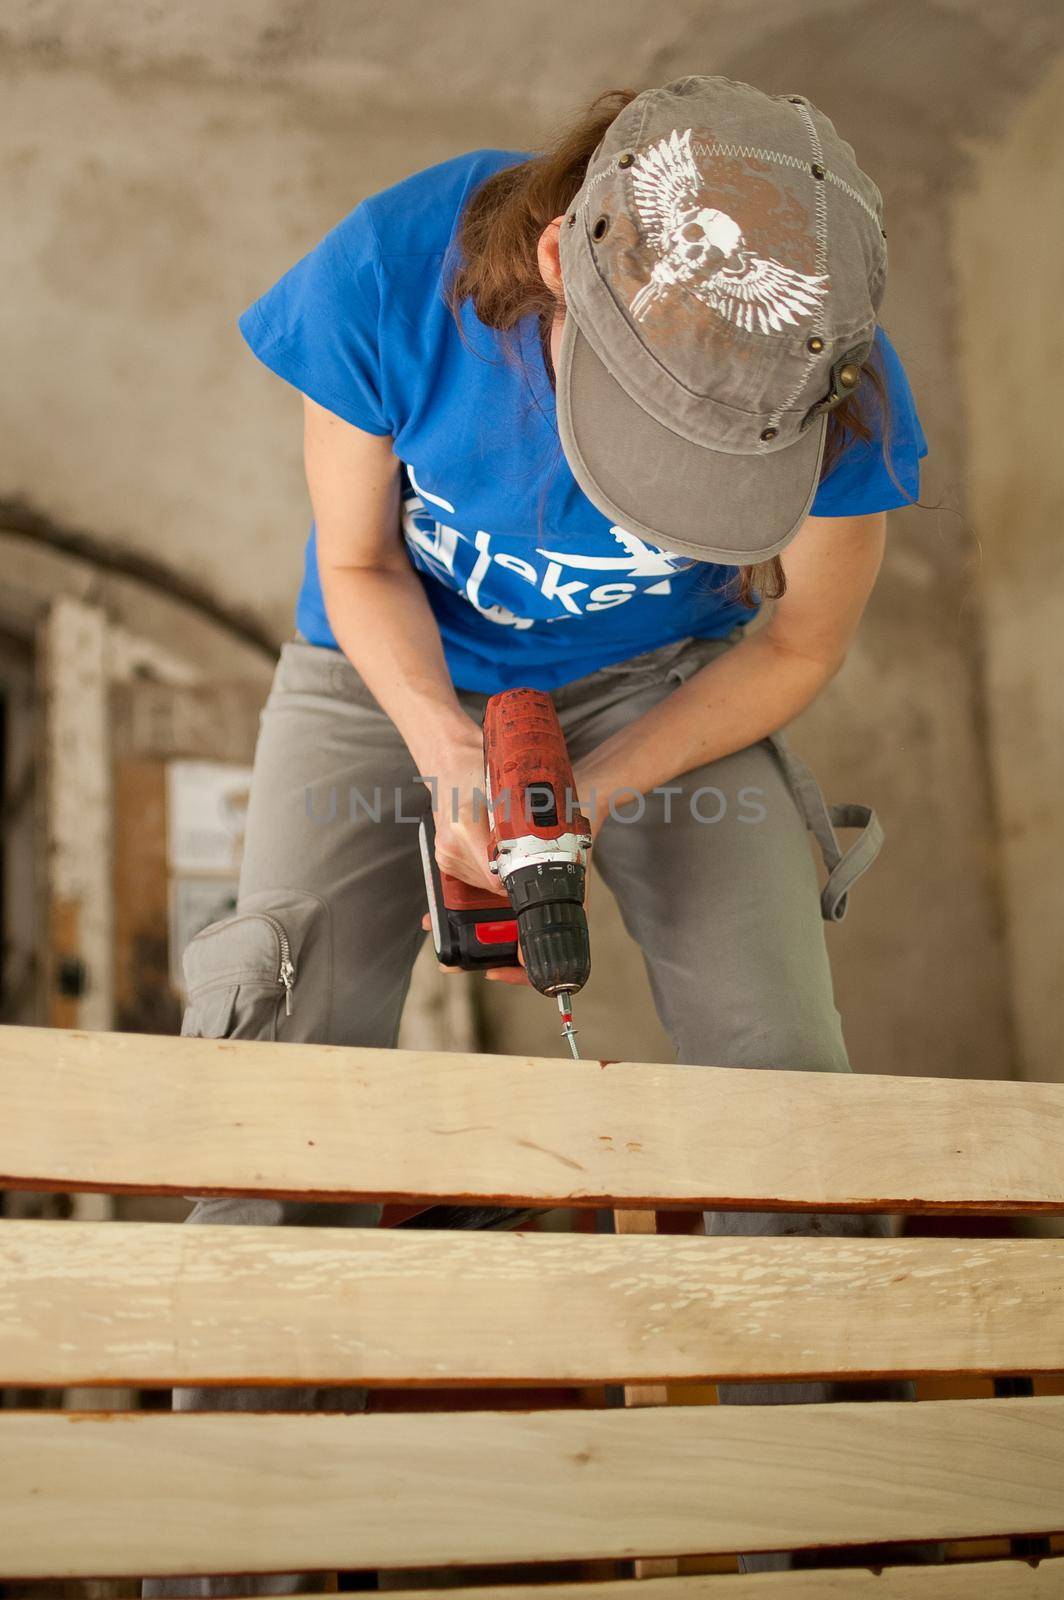 Ukraine, Goshcha, voluntary event, - August, 2021 - skilled young female worker is using power screwdriver drilling during construction wooden bench, gender equality, feminism. by balinska_lv